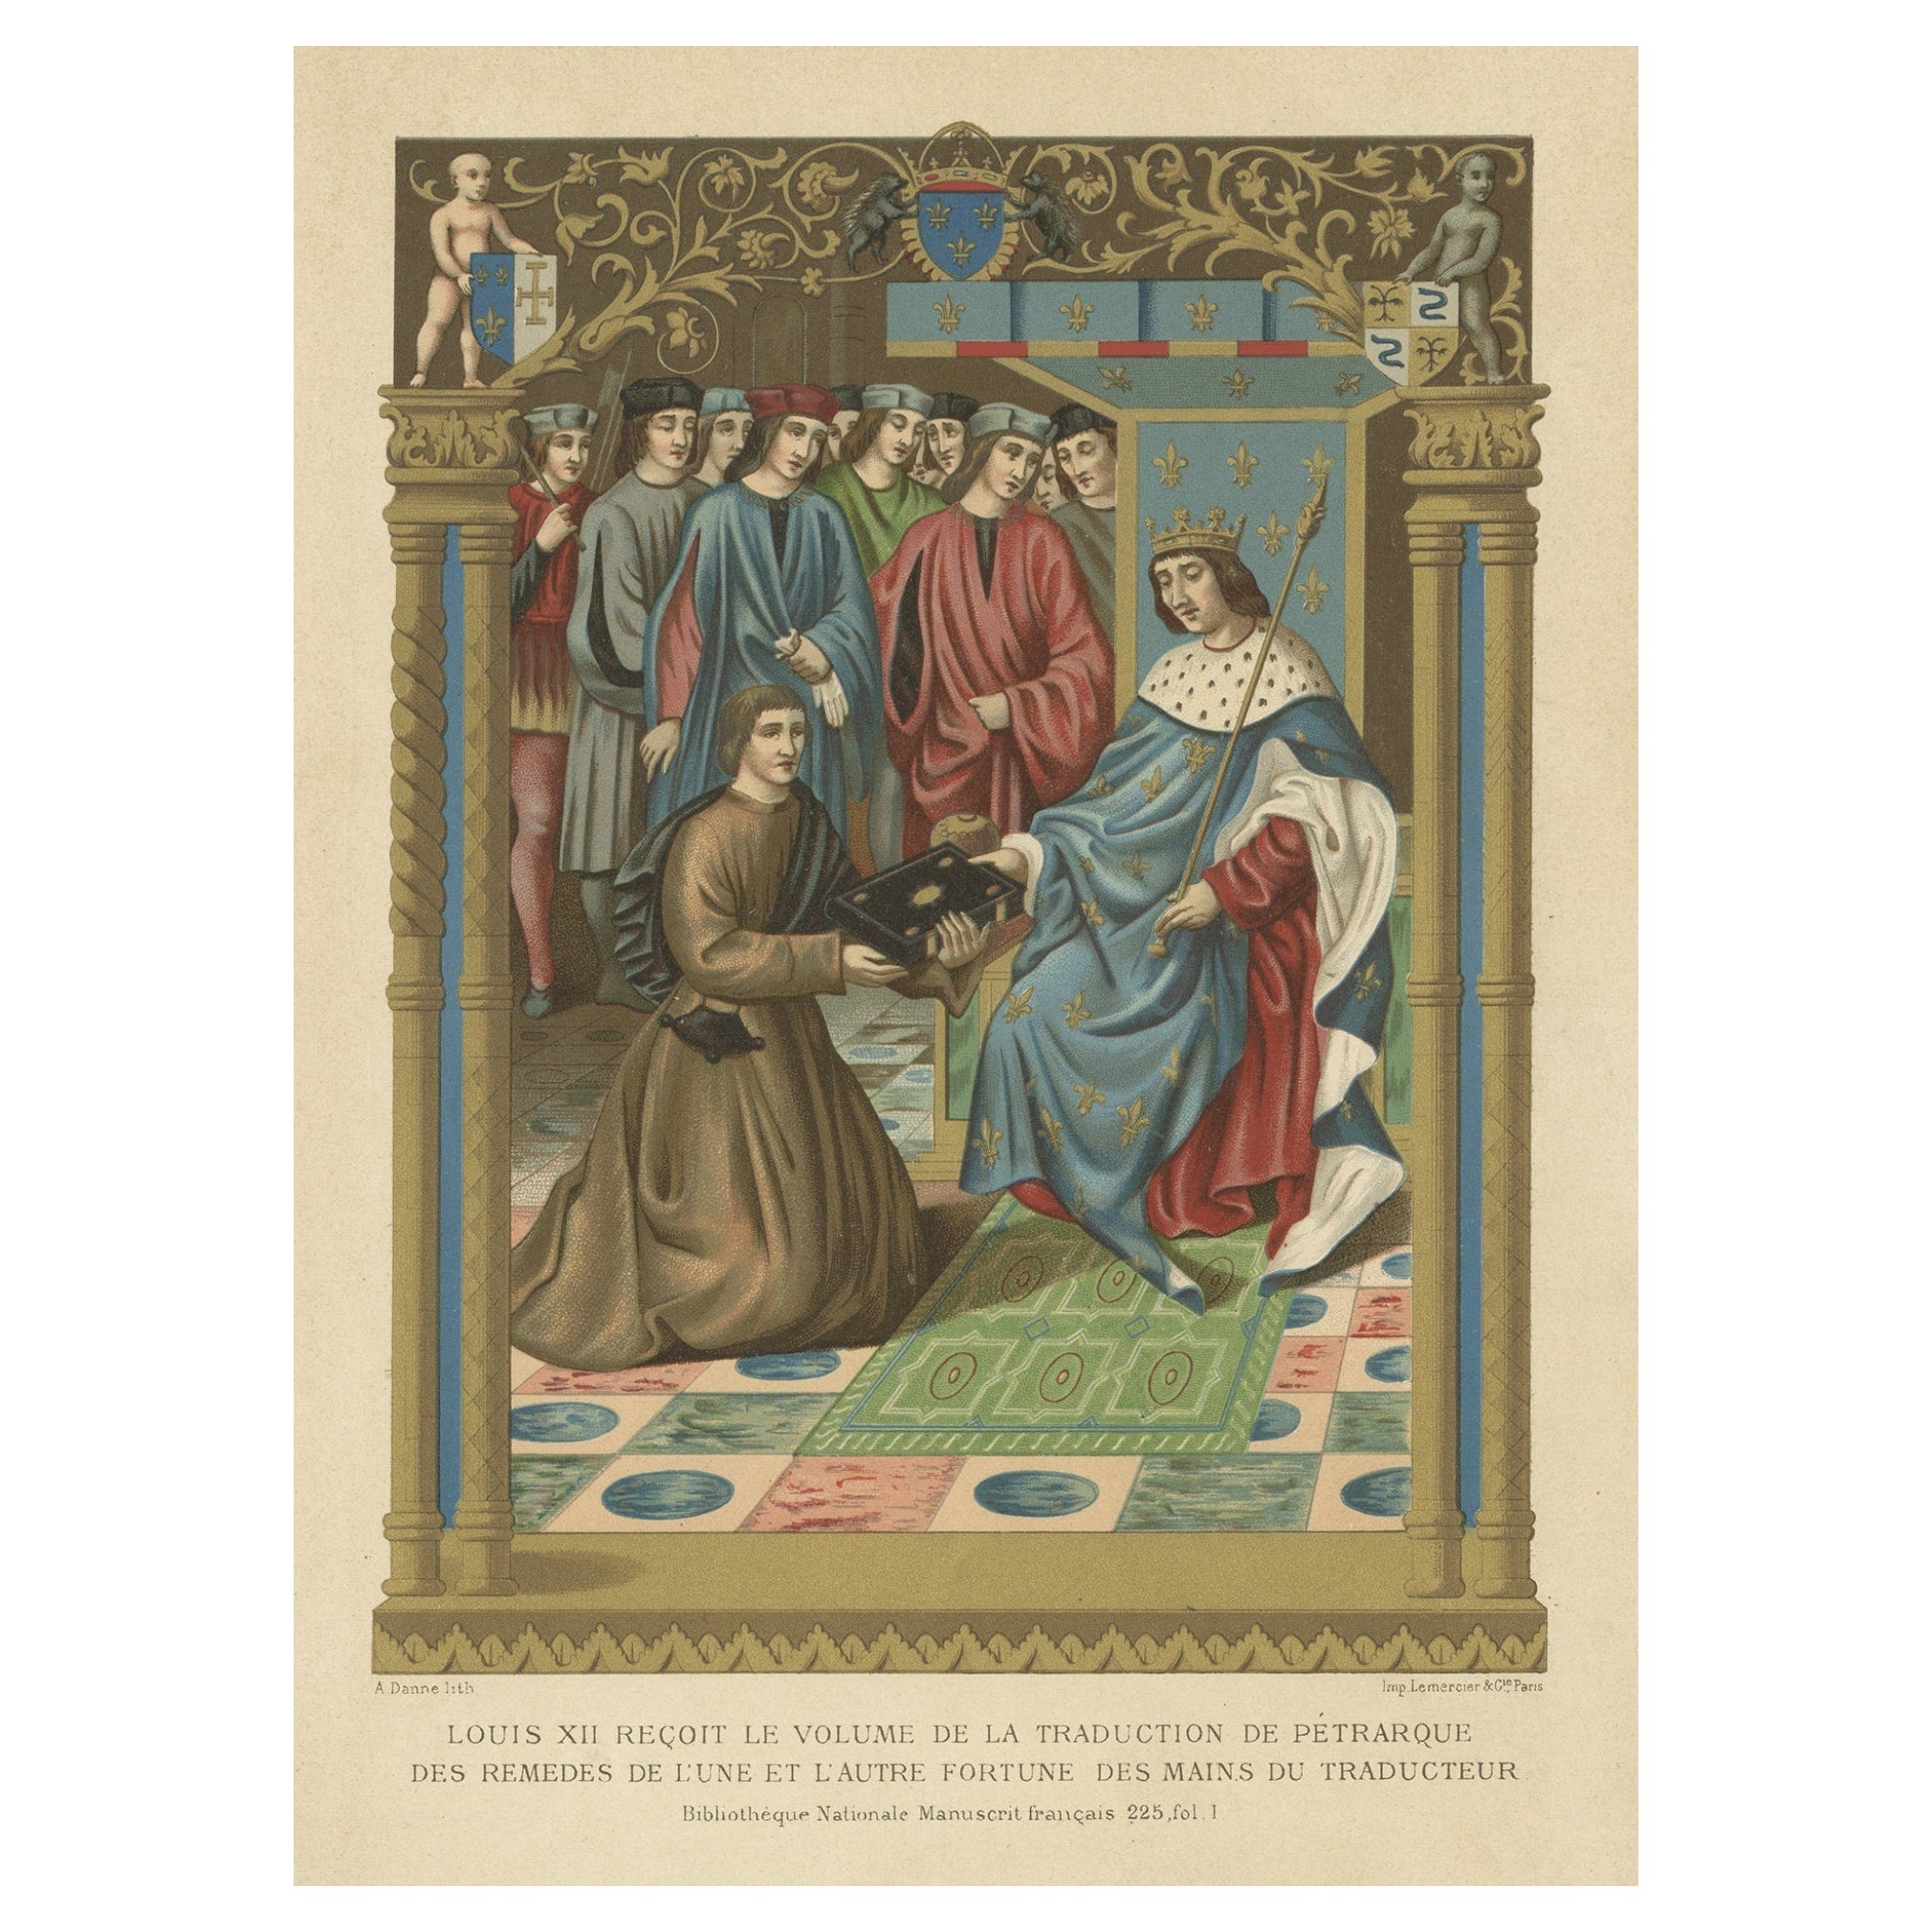 Original Antique Chromolithograph of Louis XII, King of France, ca.1890